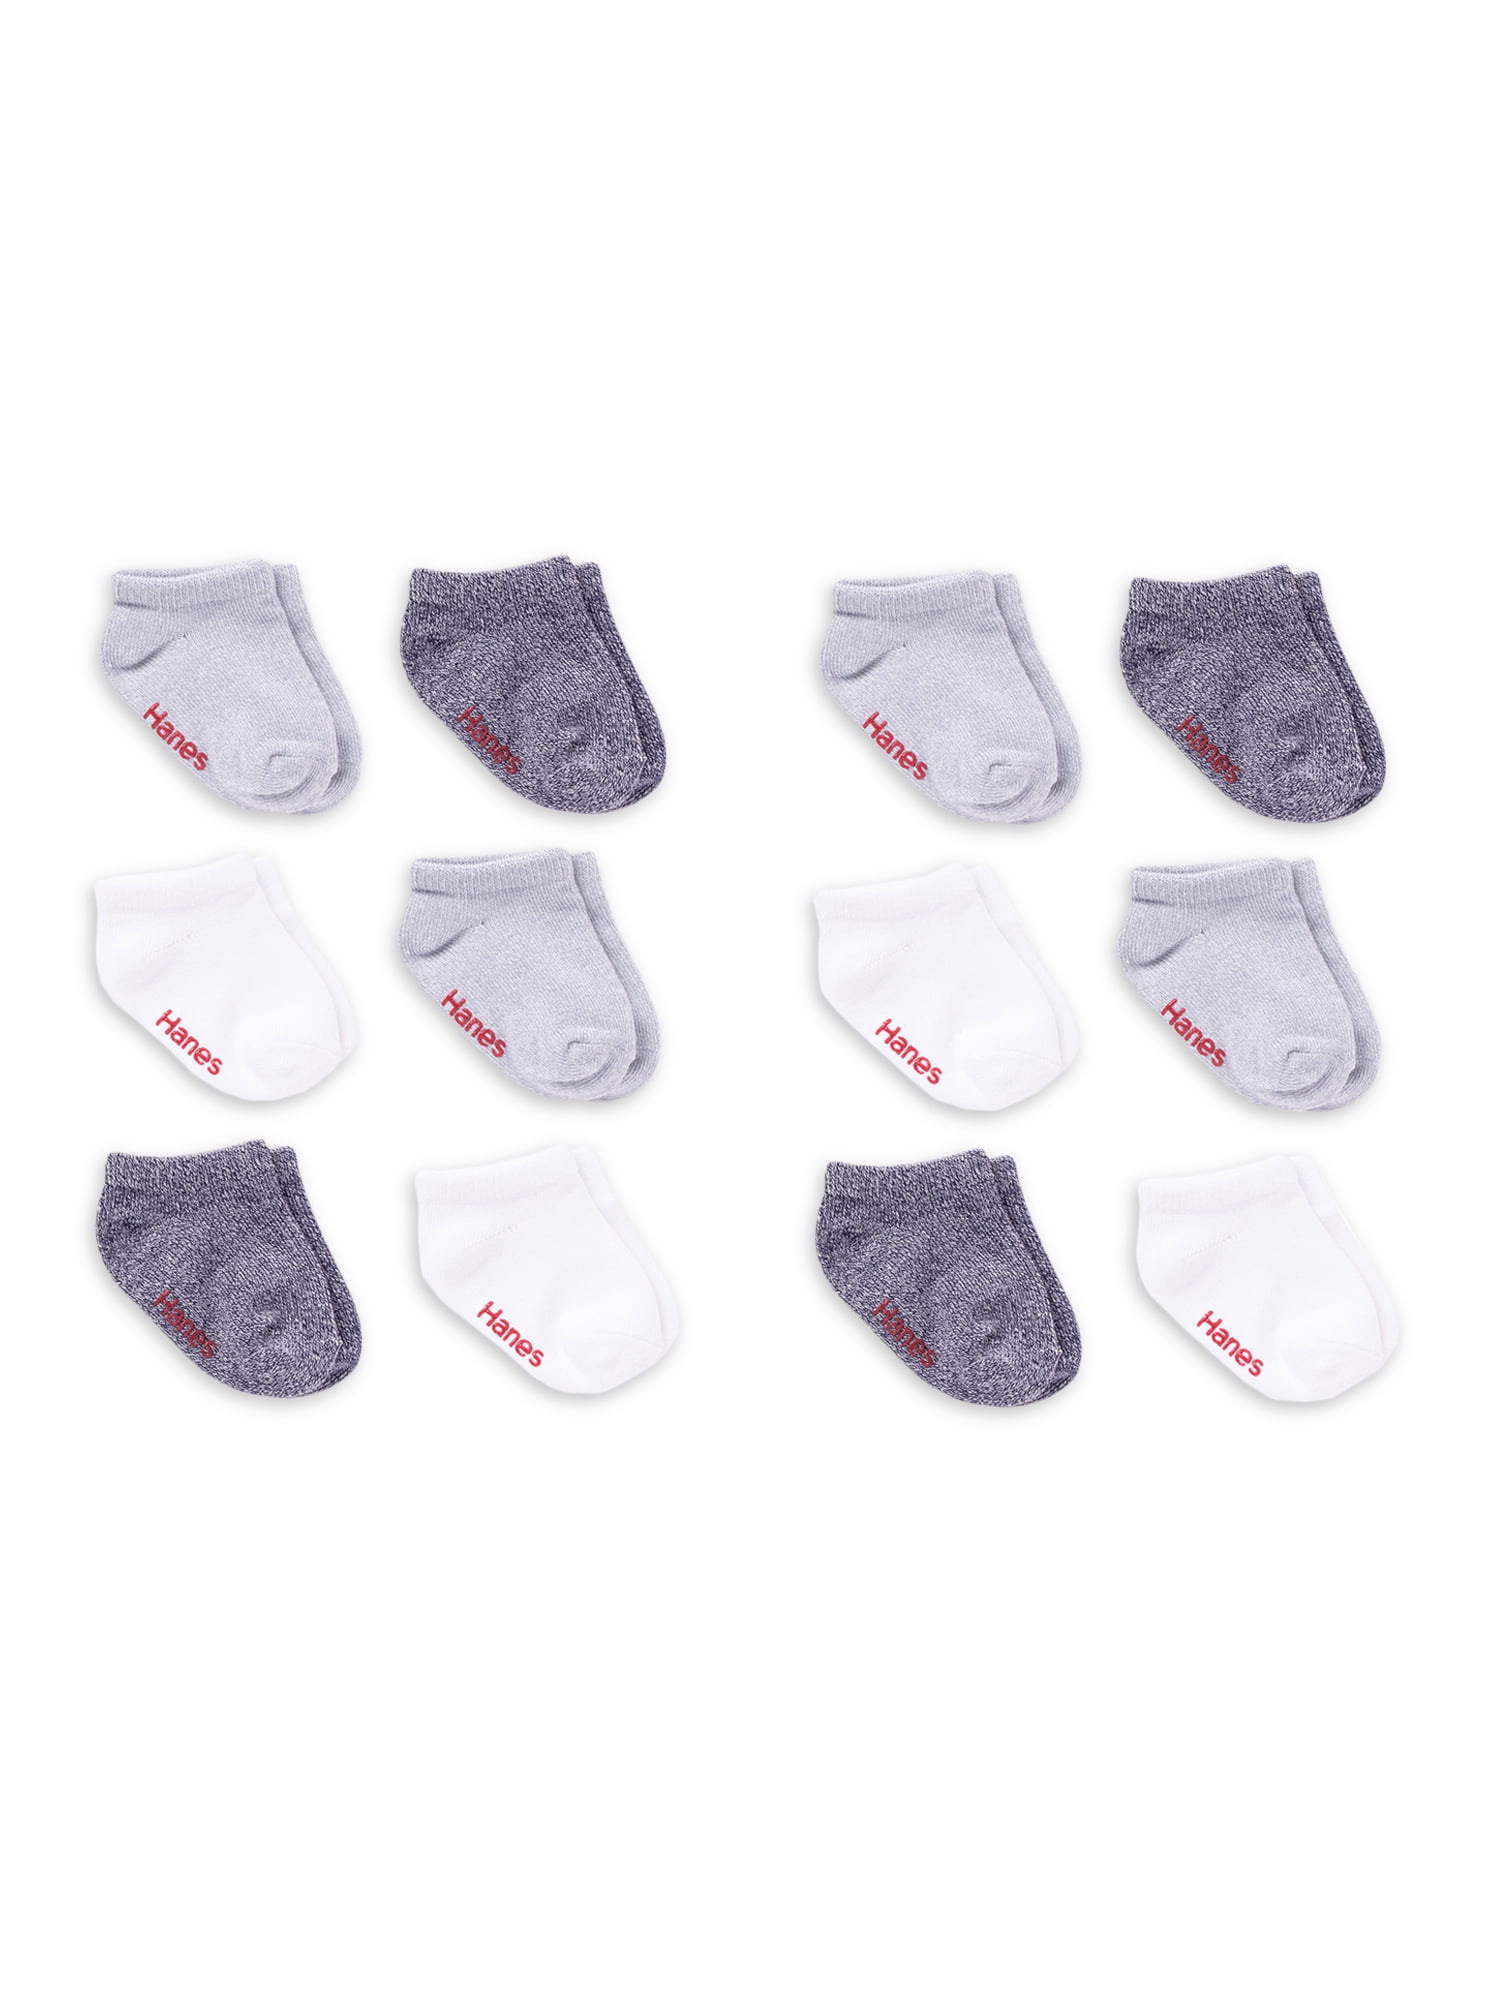 Size 0-2.5 Small Tiny Baby Boys Pale Blue Socks Quality Summer Party Holiday 0-0 